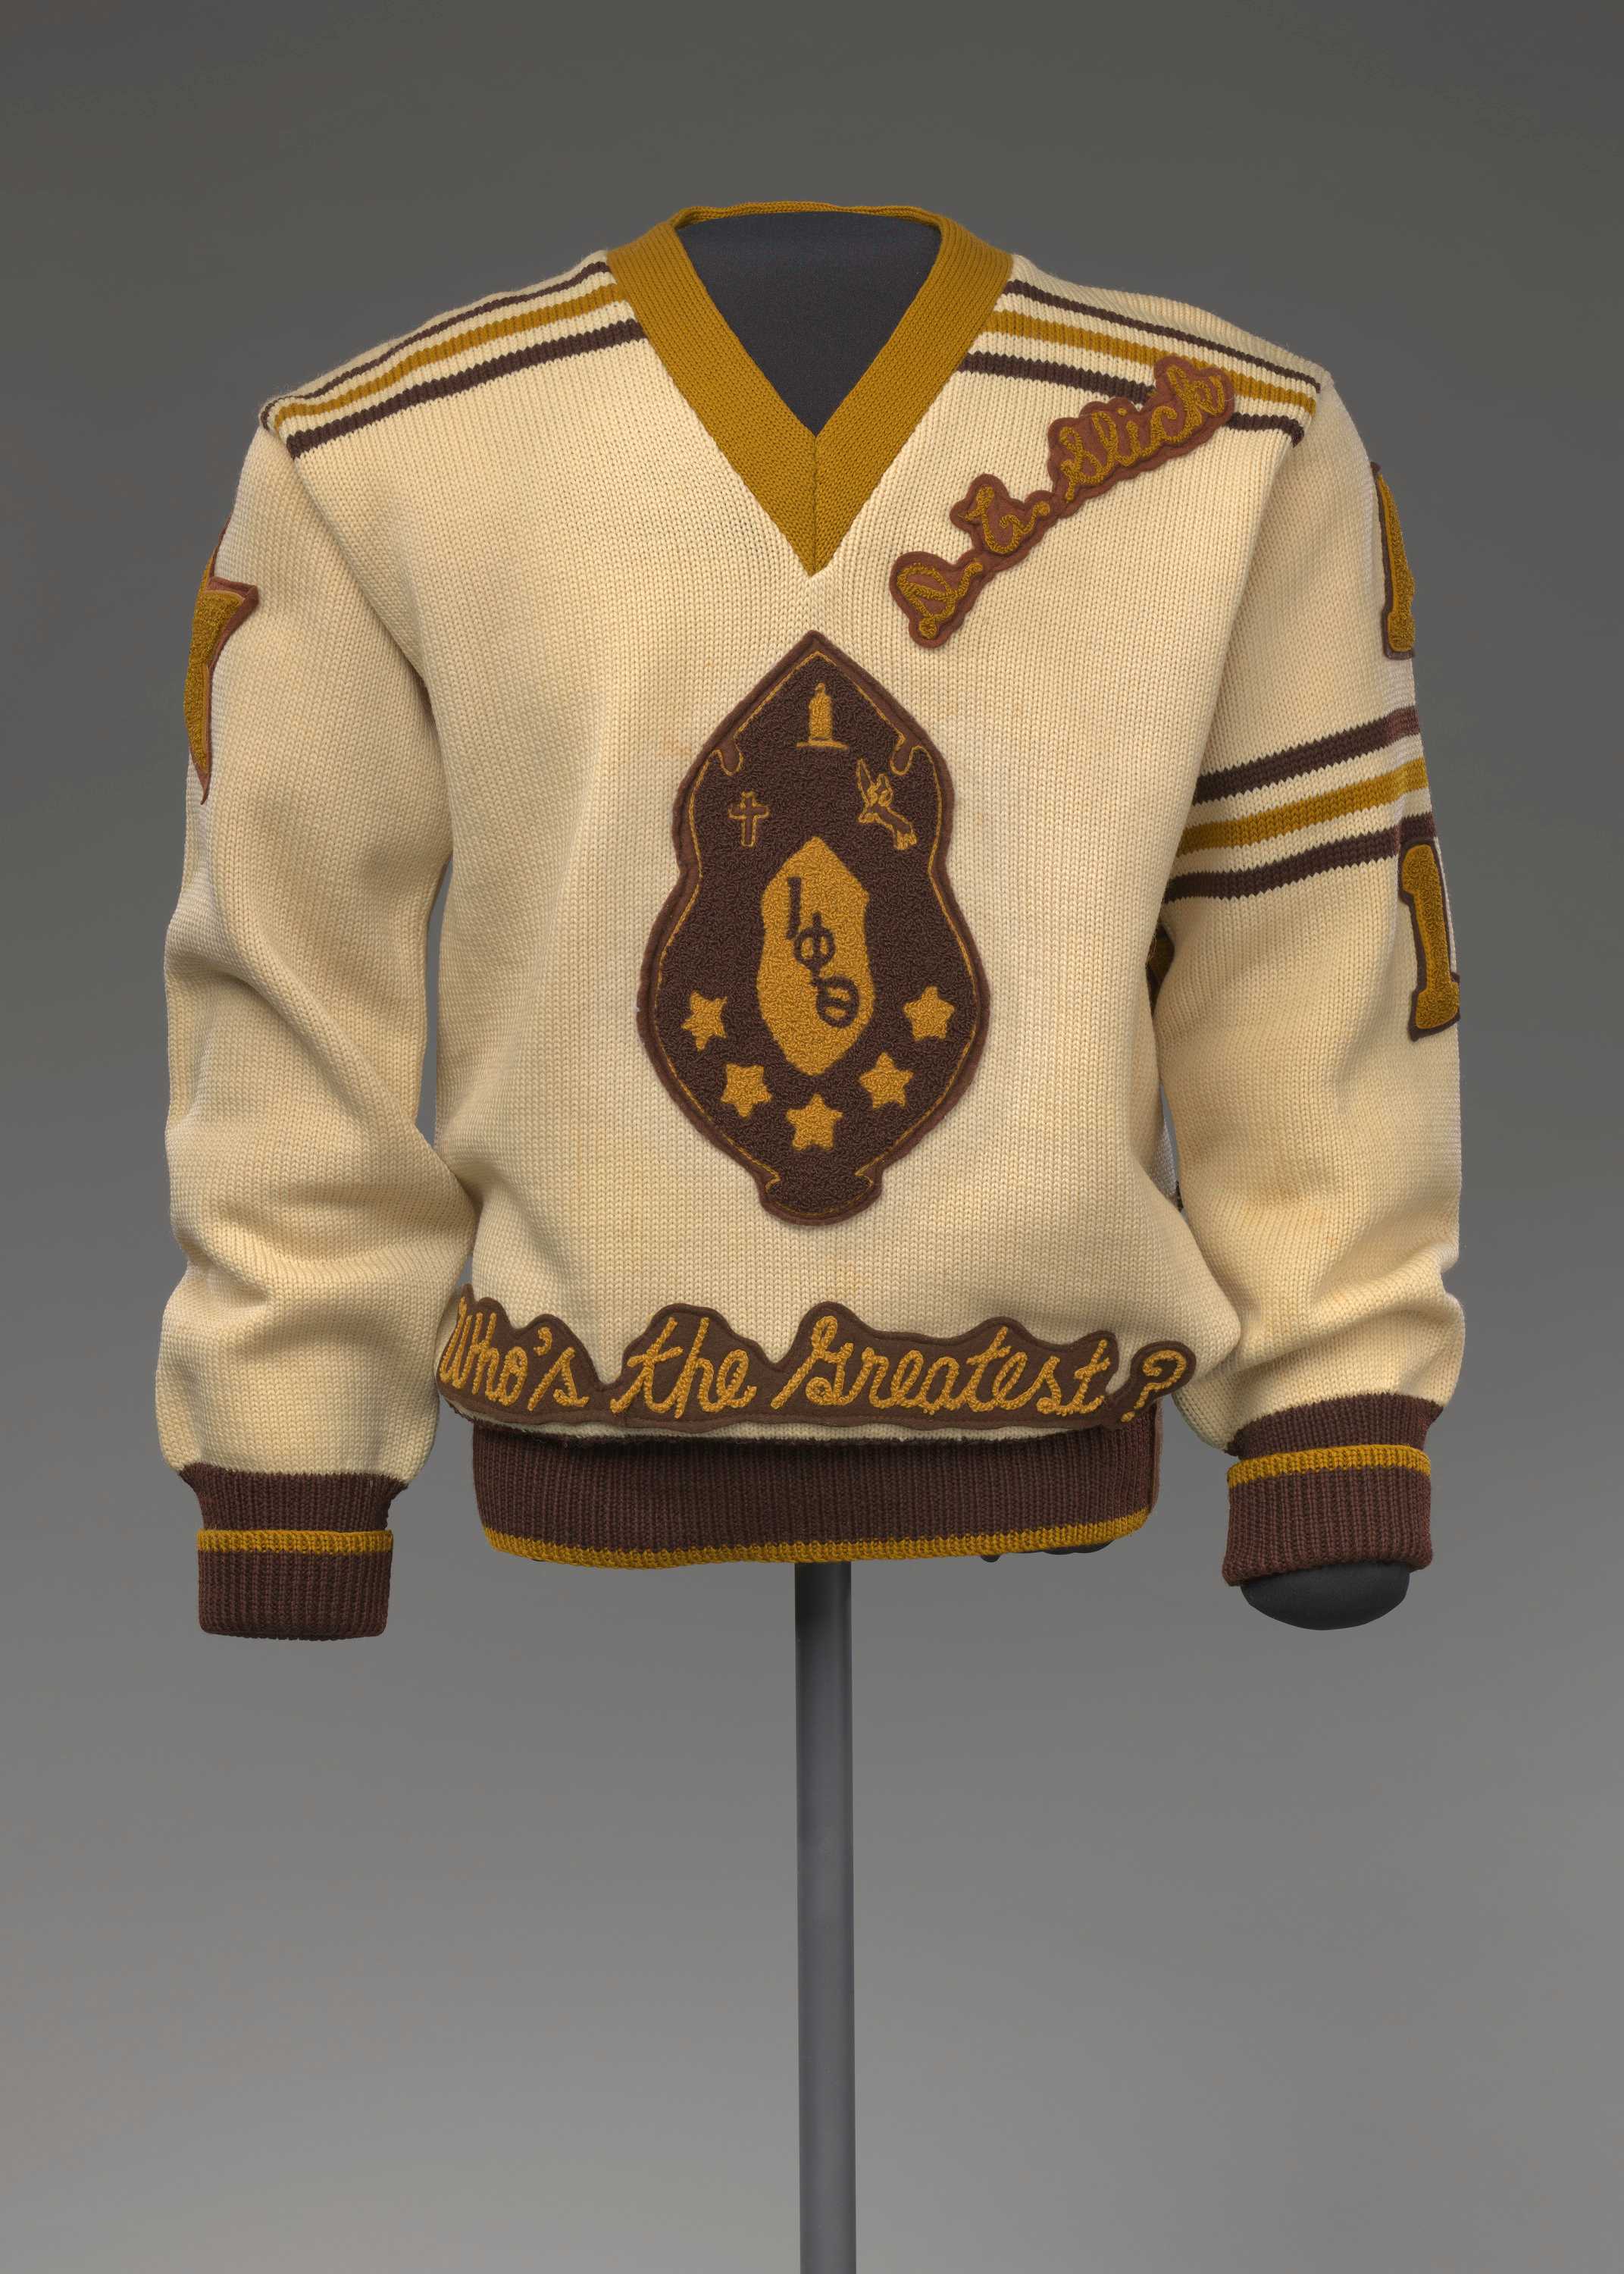 A brown, gold, and beige knitted pullover letterman sweater for the Iota Phi Theta Fraternity.